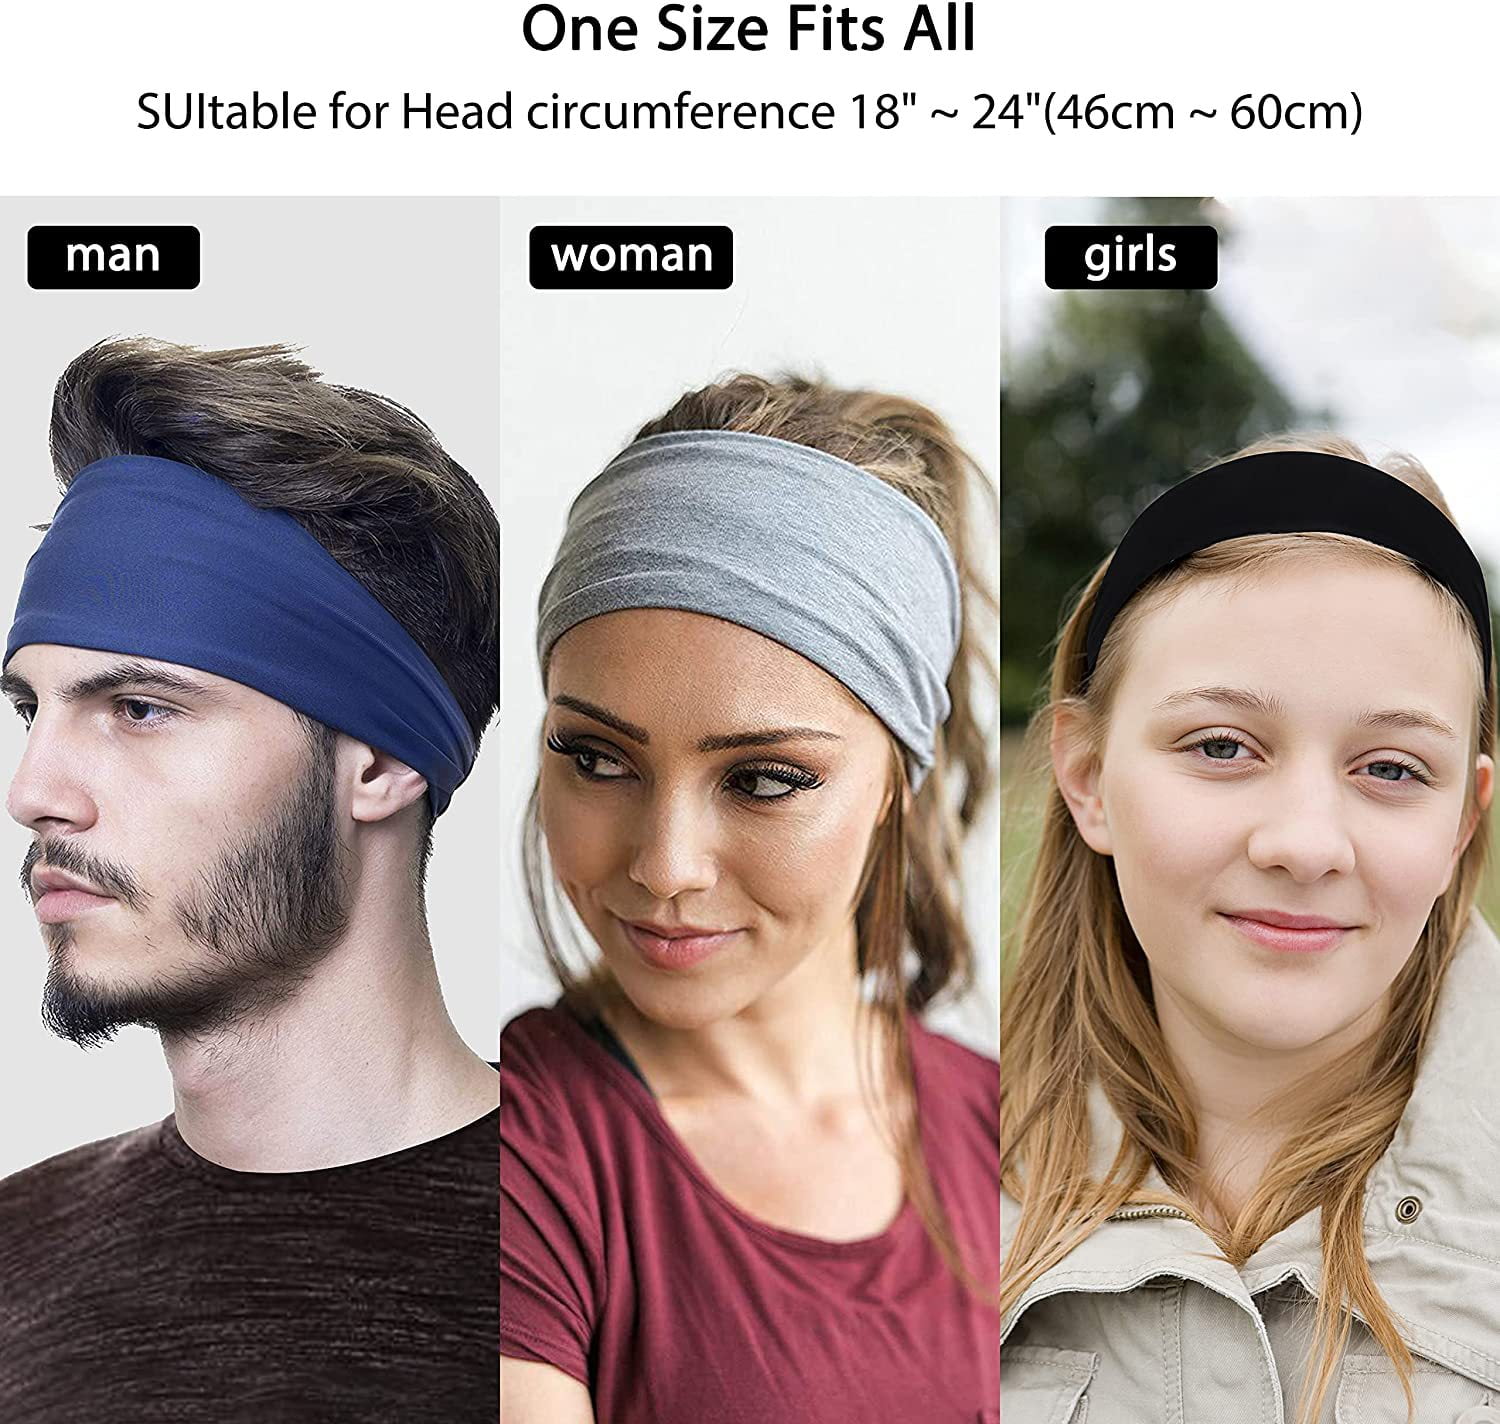 Athletic Mens Headband 6 Pack, Sports Headbands, Men Workout Accessories,  Sweat Band, Sweat Wicking Head Band Sweatbands for Running Gym Training  Tennis Basketball Football, Unisex Hairband,,，G192236 